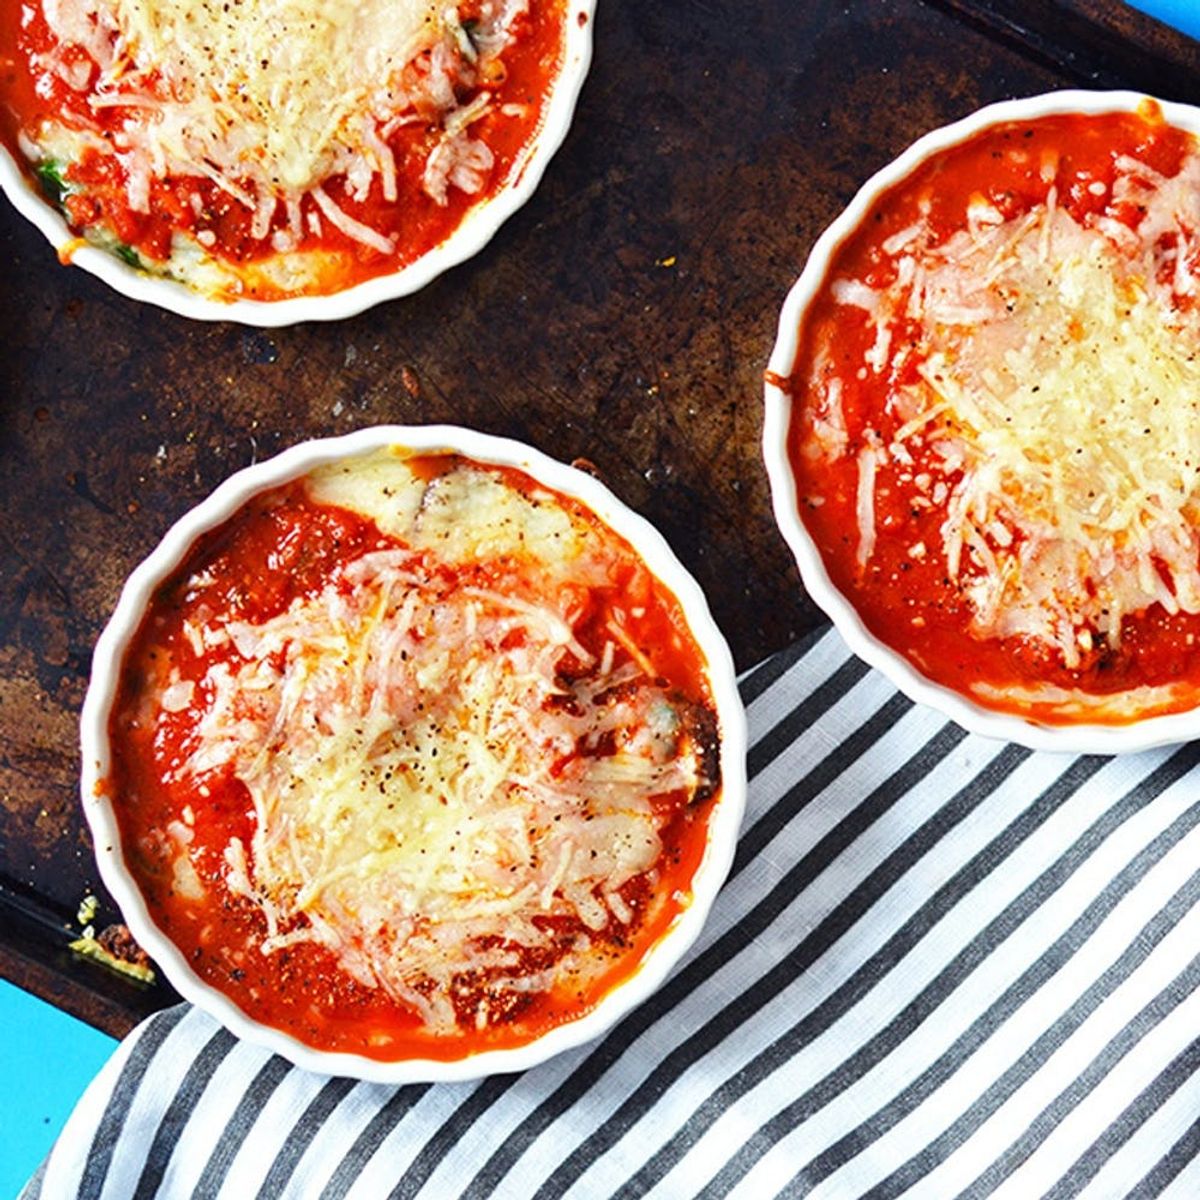 These Guilt-Free Pizza Bowls Are a Cheese-Lover’s Dream